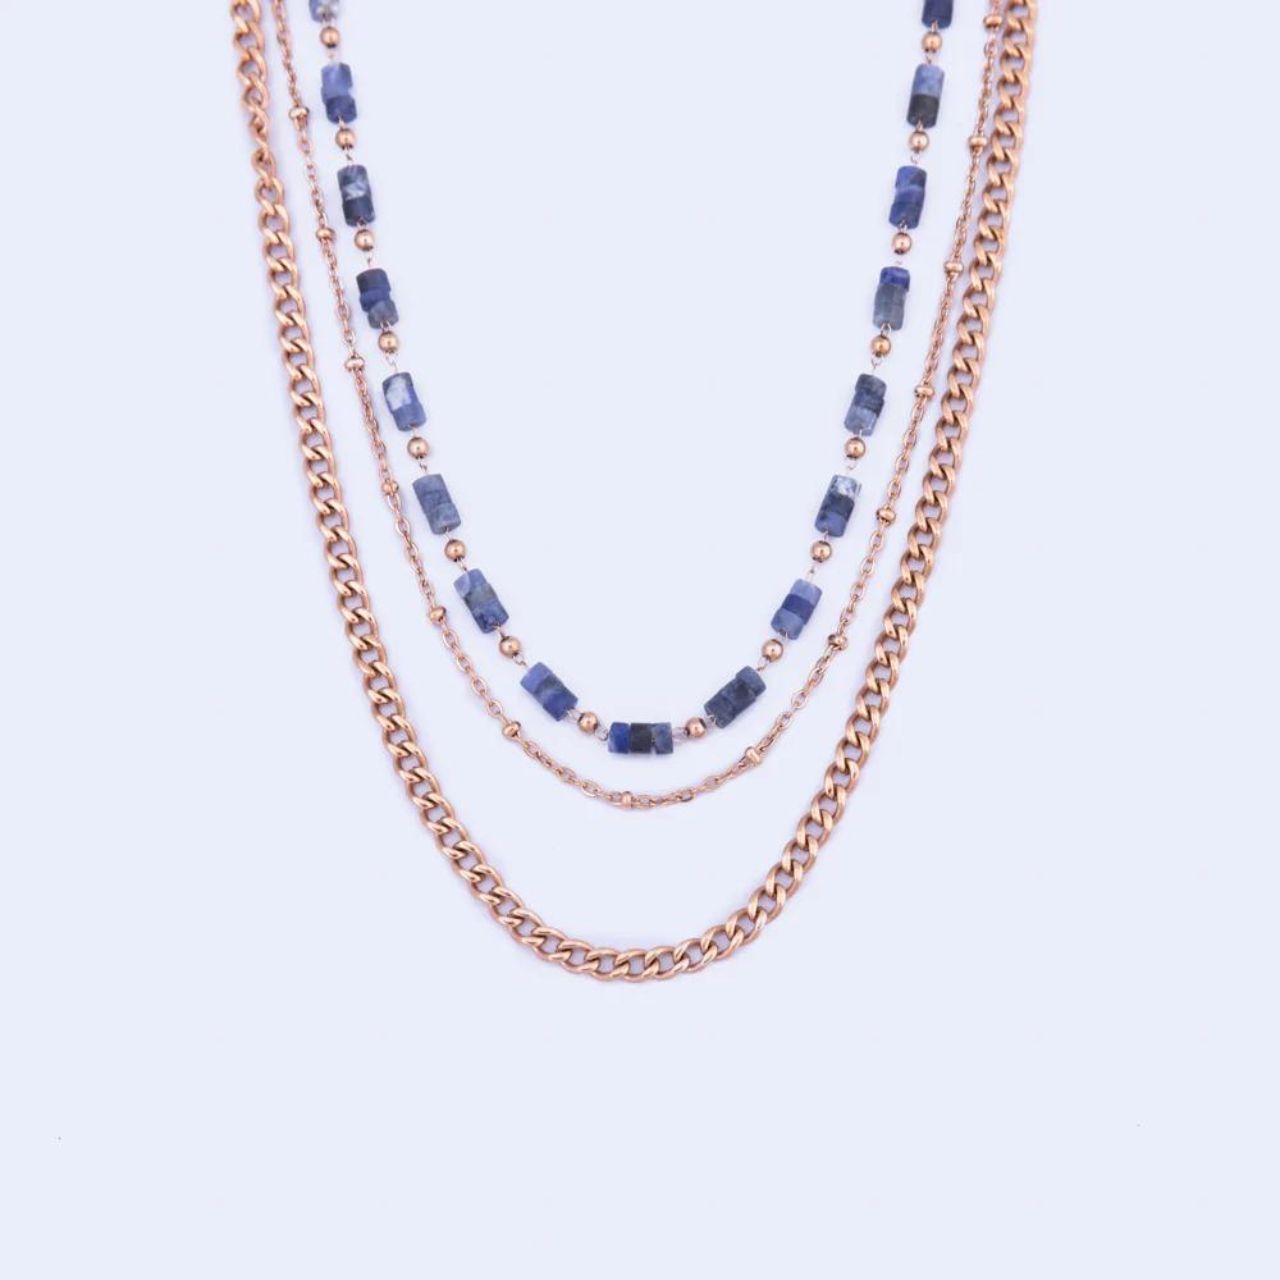 Layered Blue Sodalite Necklace by Knight & Day  Layered chain & Sodalite semi precious stone necklace.  Lengths 38/41/44 + 5cm extension. IP Rose gold plating.